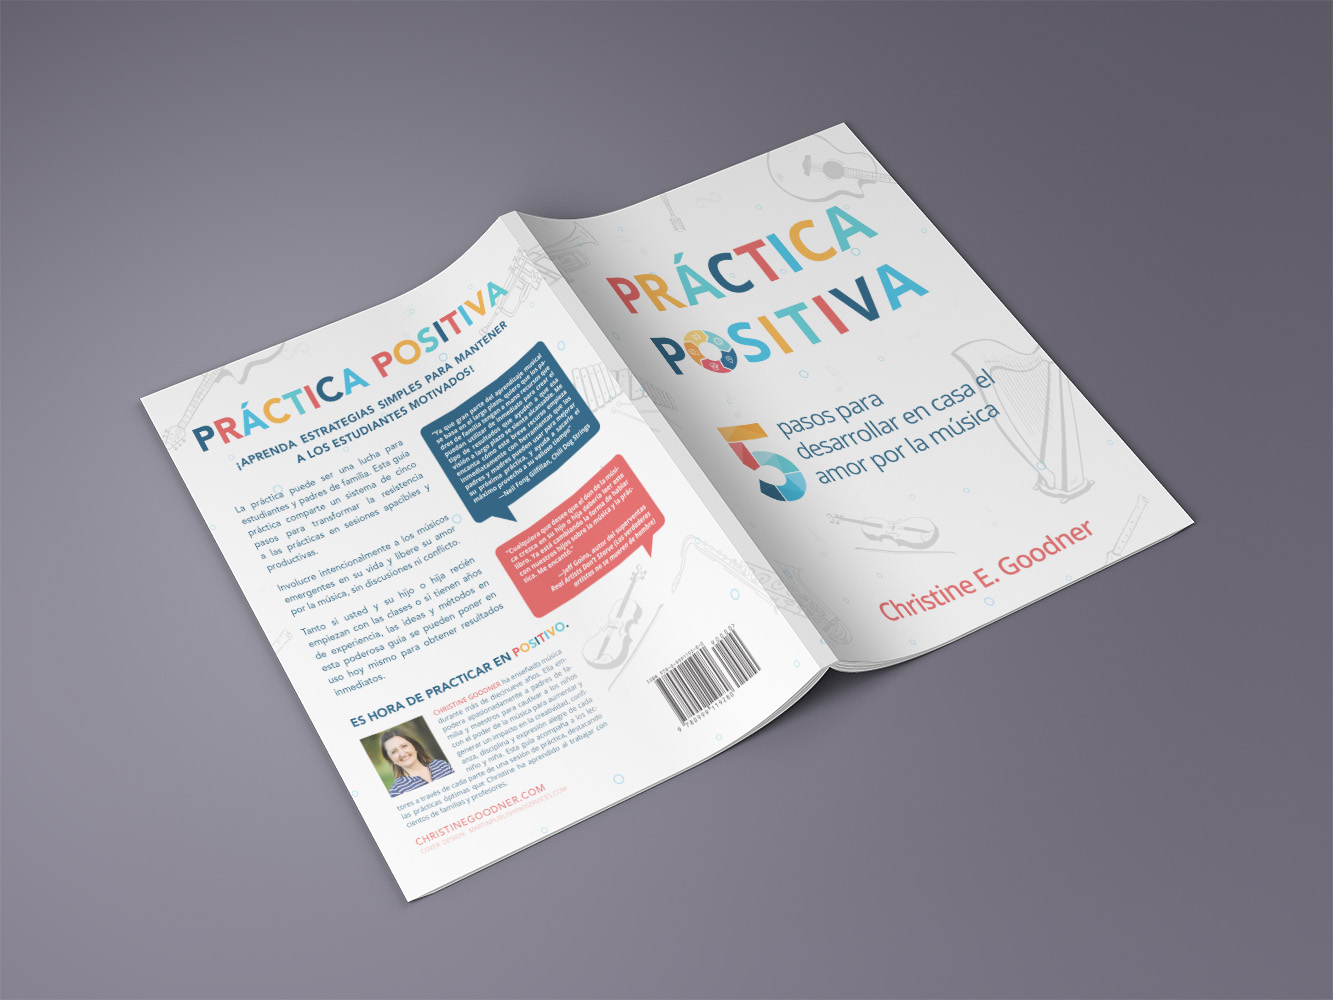 Spanish music book front and back cover design